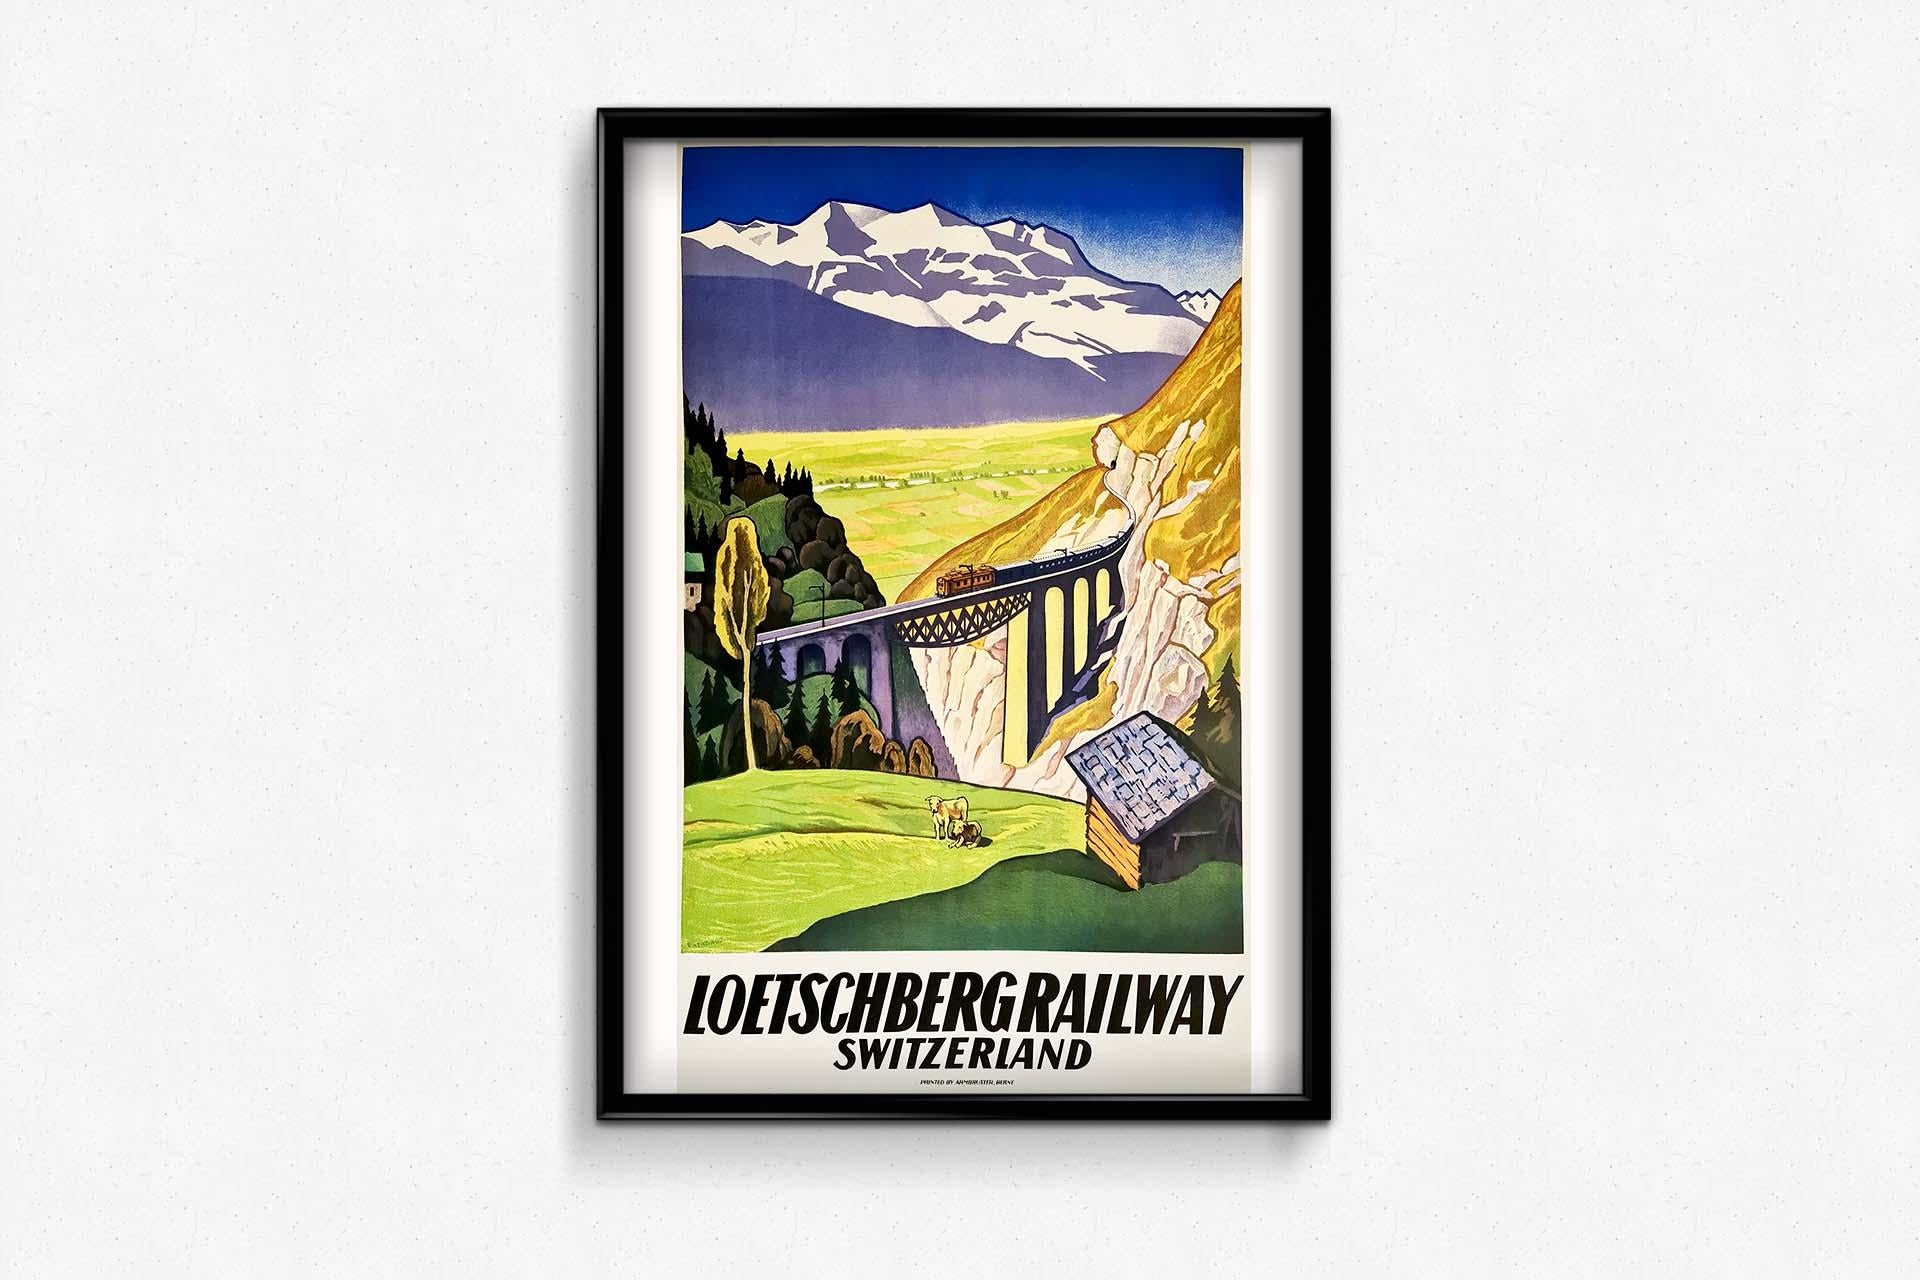 Original poster for the Bern Lotschberg Simplon Railway (BLS; 1913-2006). The image by Eugen Henziross (1877-1961) shows a train making its way through a rocky mountain tunnel and over a bridge in the Swiss countryside, with a wooden hut and sheep